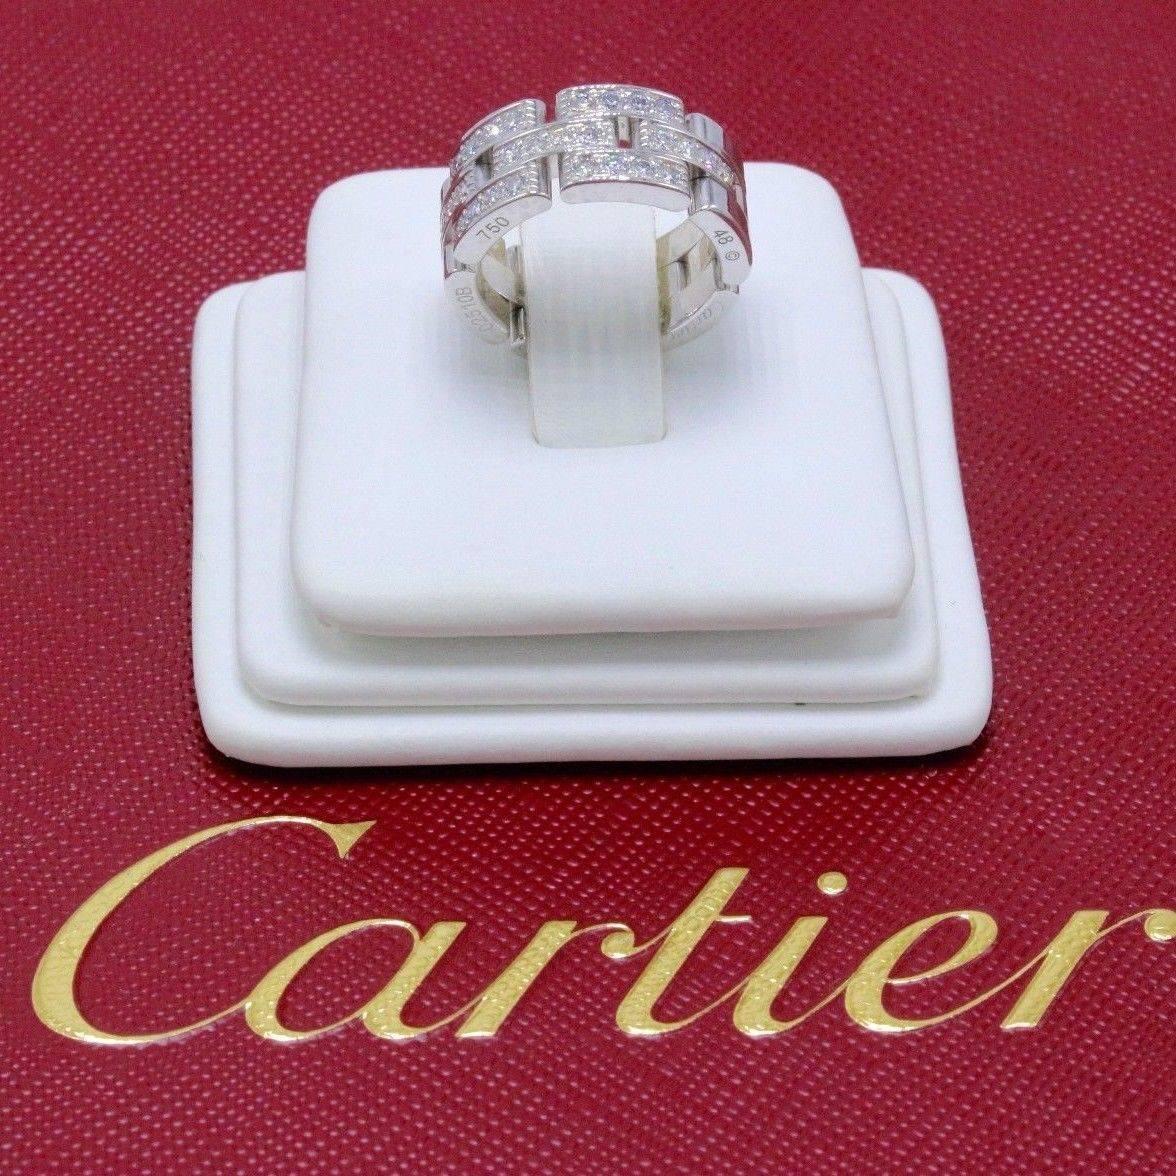 Cartier Maillon Panthere Diamond Wedding Band Ring 18k White Gold Links ...